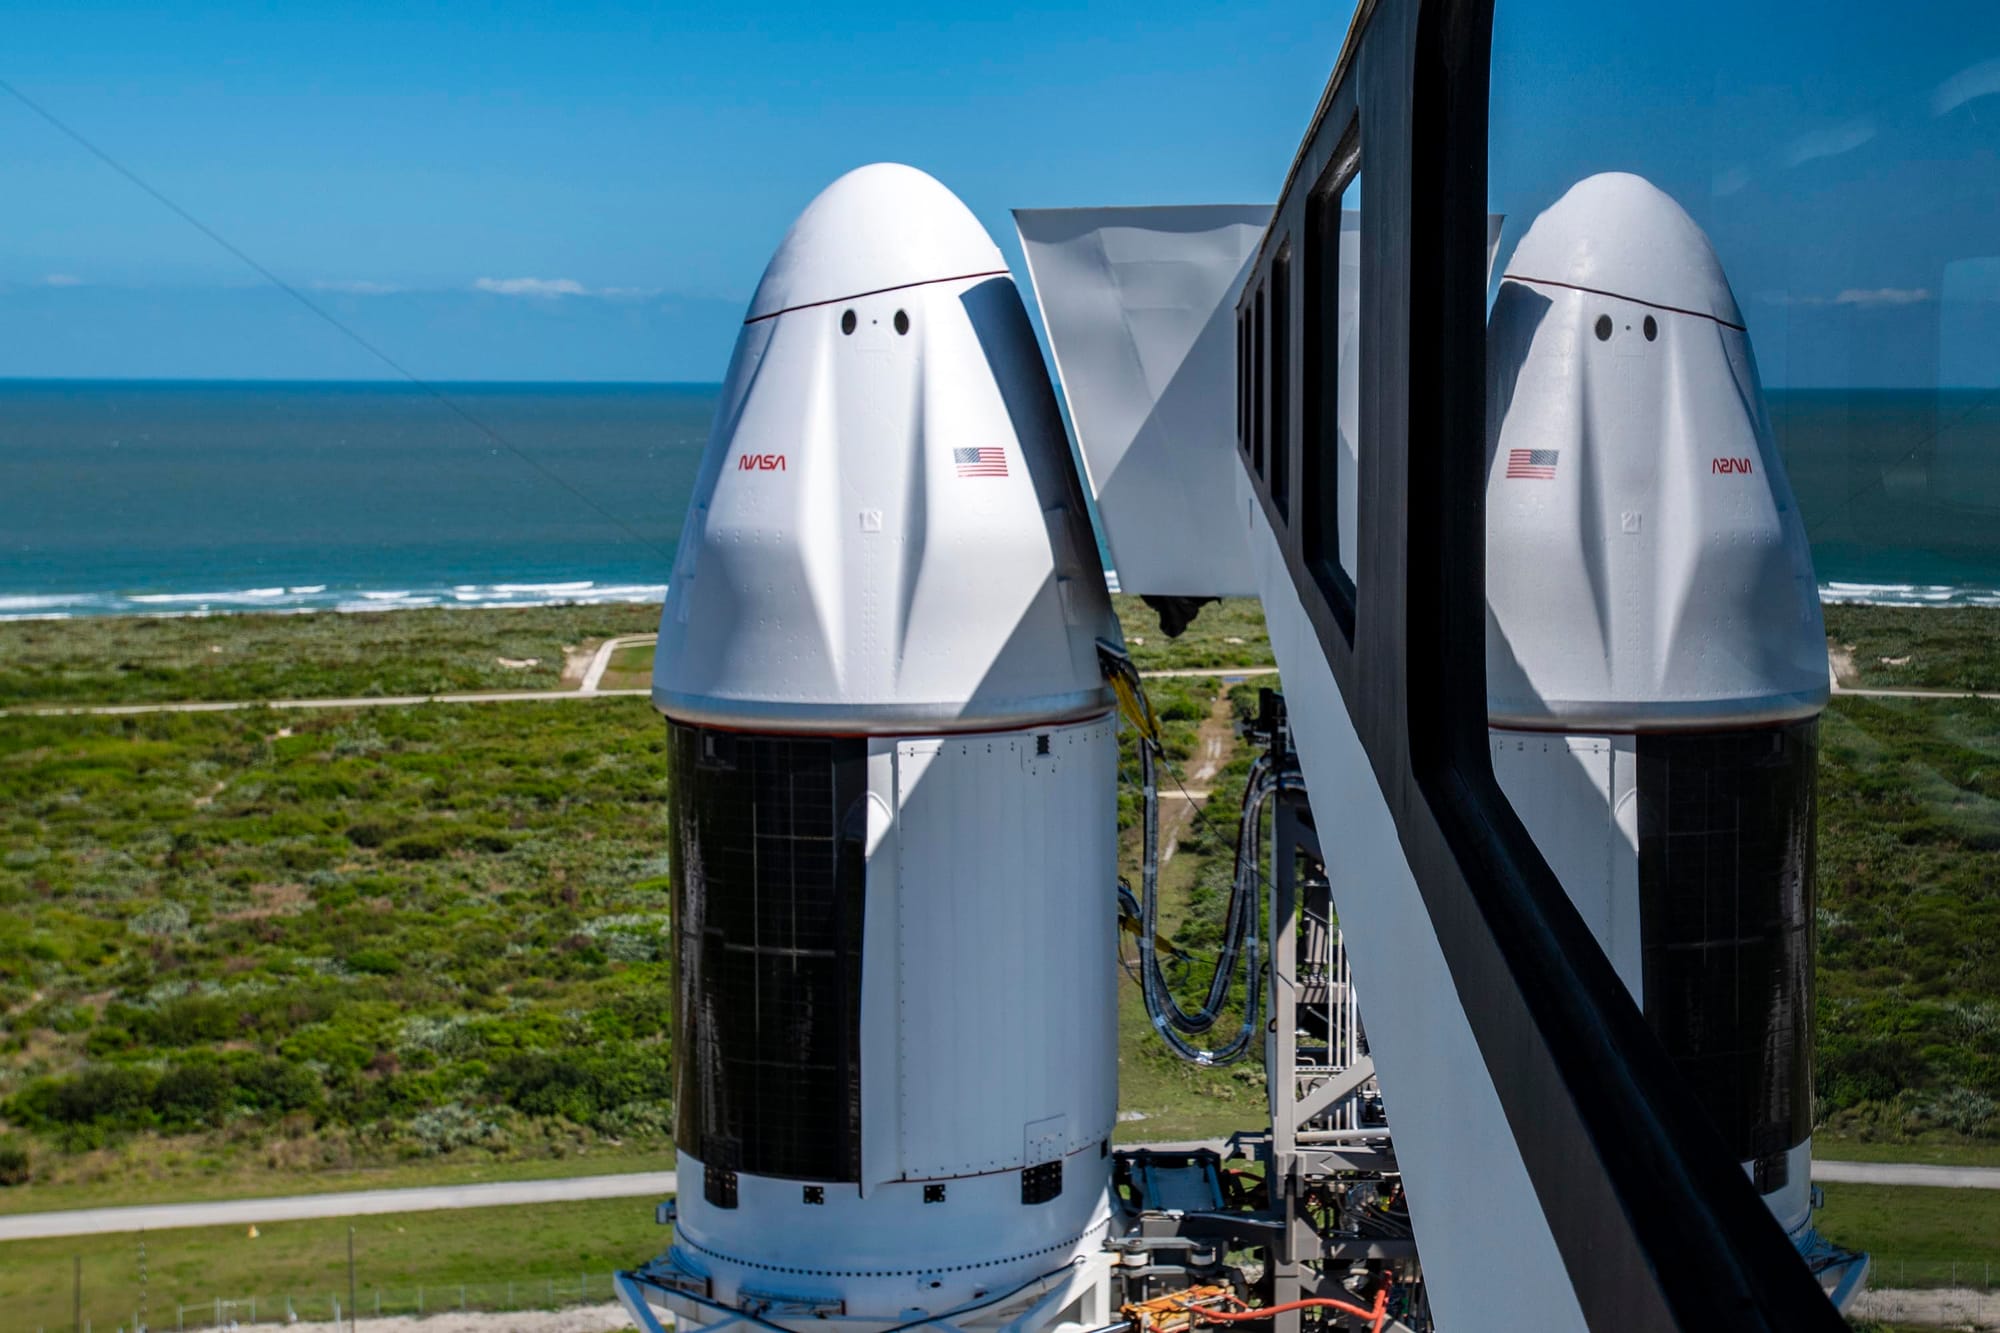 Cargo Dragon V2 C209 atop of Falcon 9 at Space Launch Complex 40 prior to launch. ©SpaceX